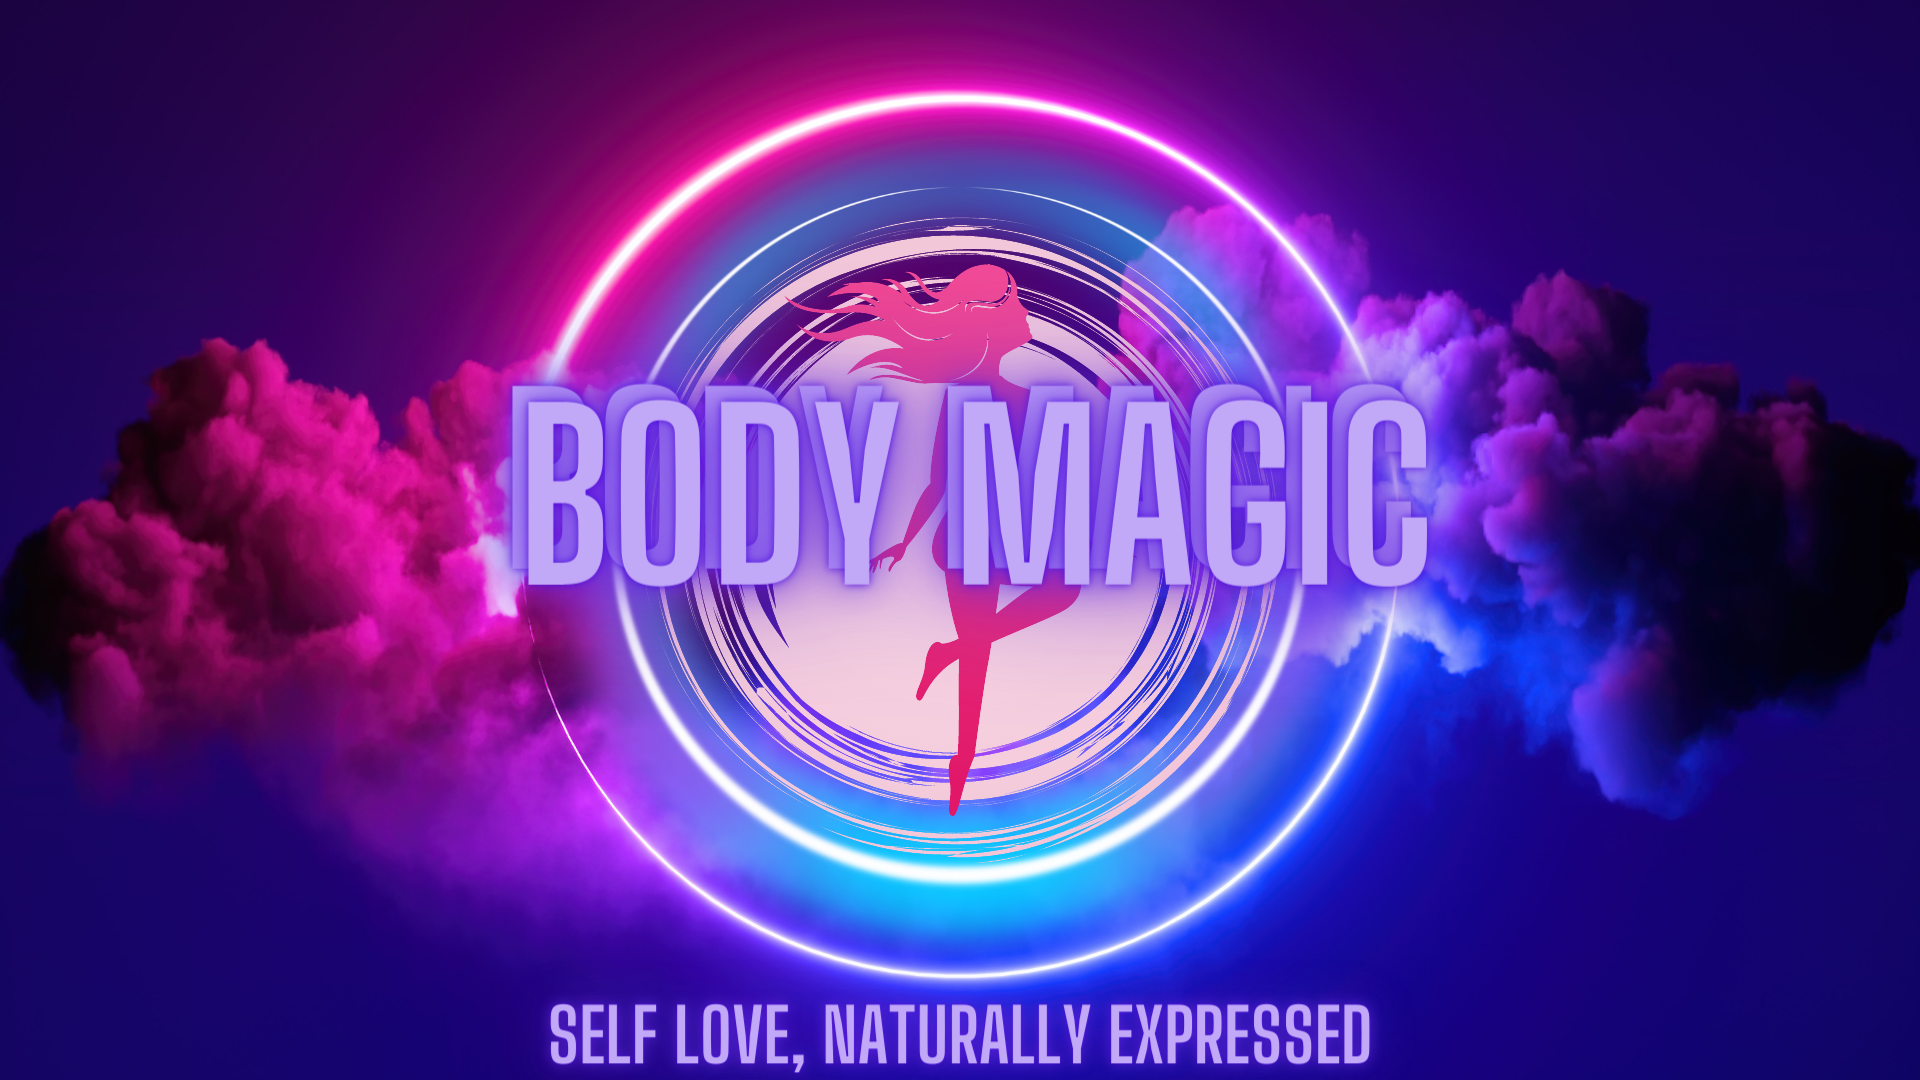 Body magic, self love & weight loss from Liz Stewart Hypnotherapy